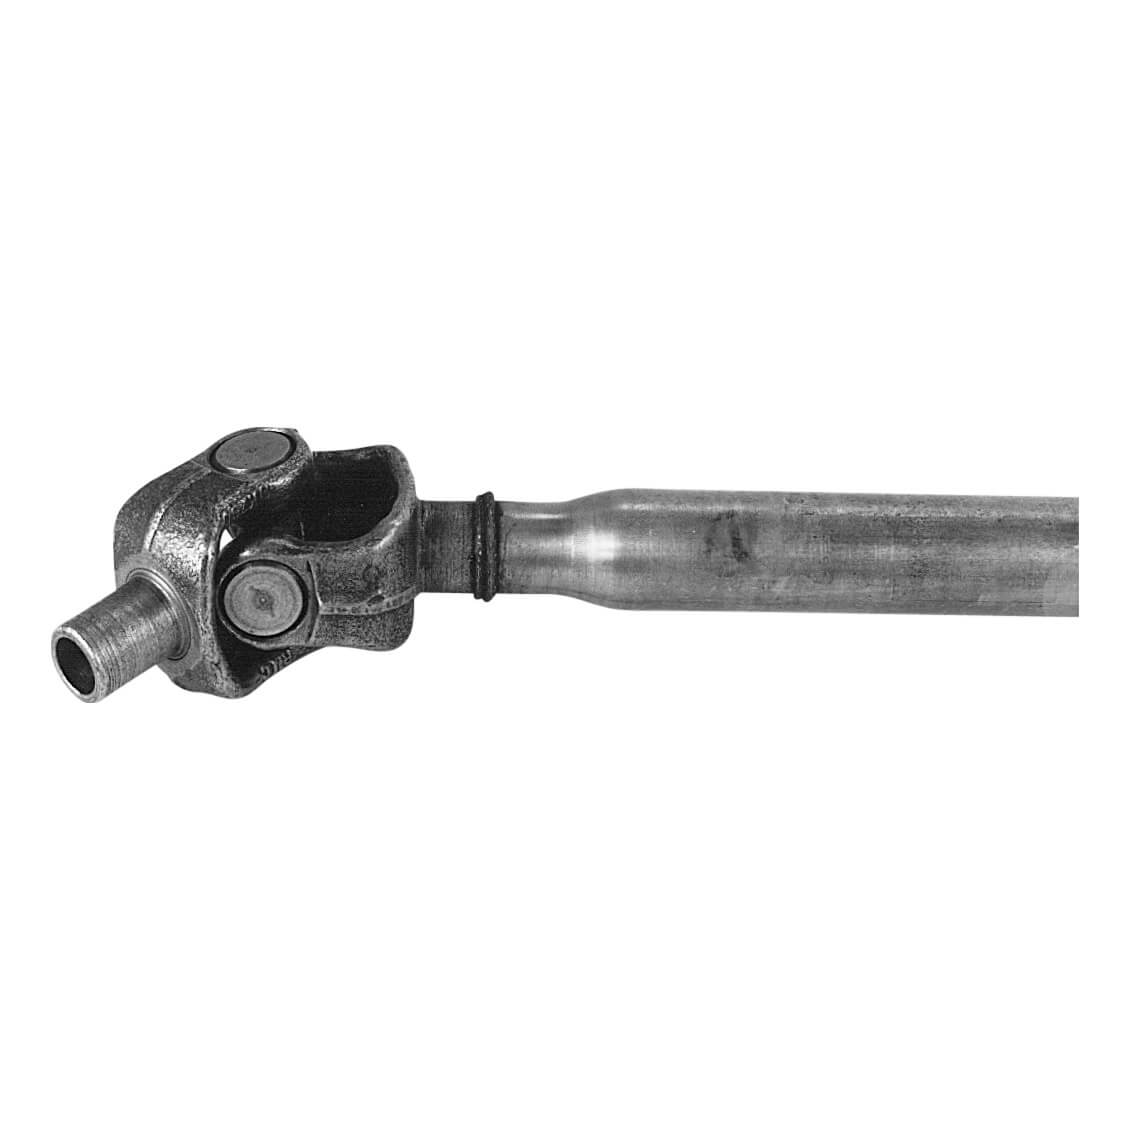 Universal joint assembly with welded extension shaft